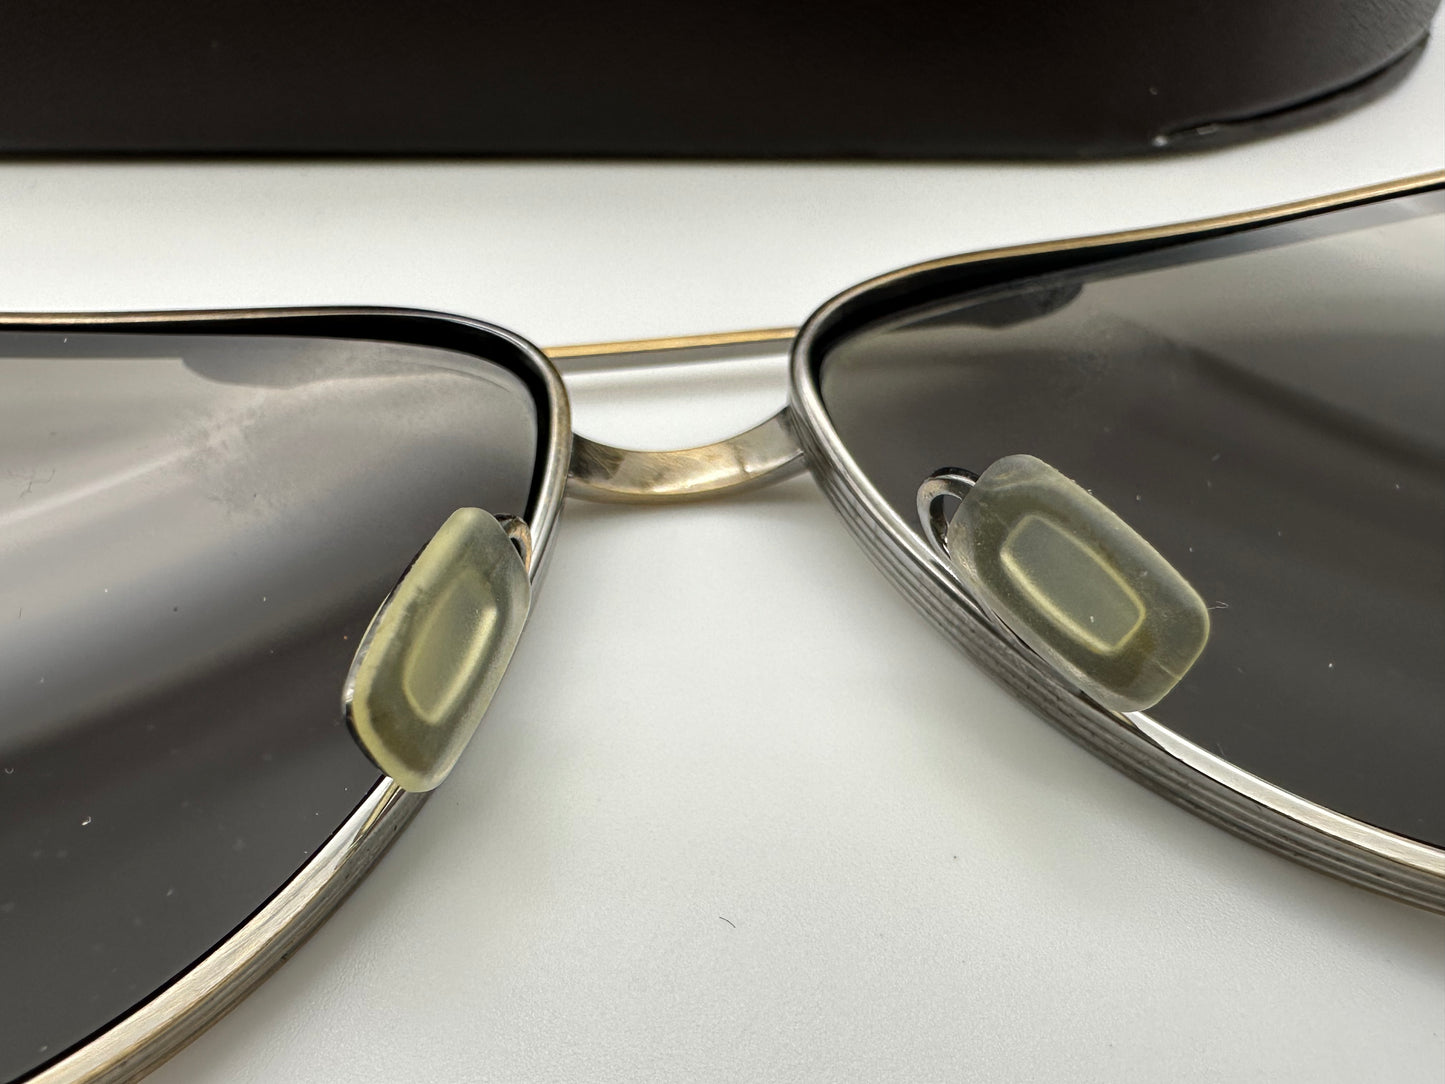 Oliver Peoples Copter 62mm AG G15 Gunmetal Gray Preowned with NEW Poly Lens